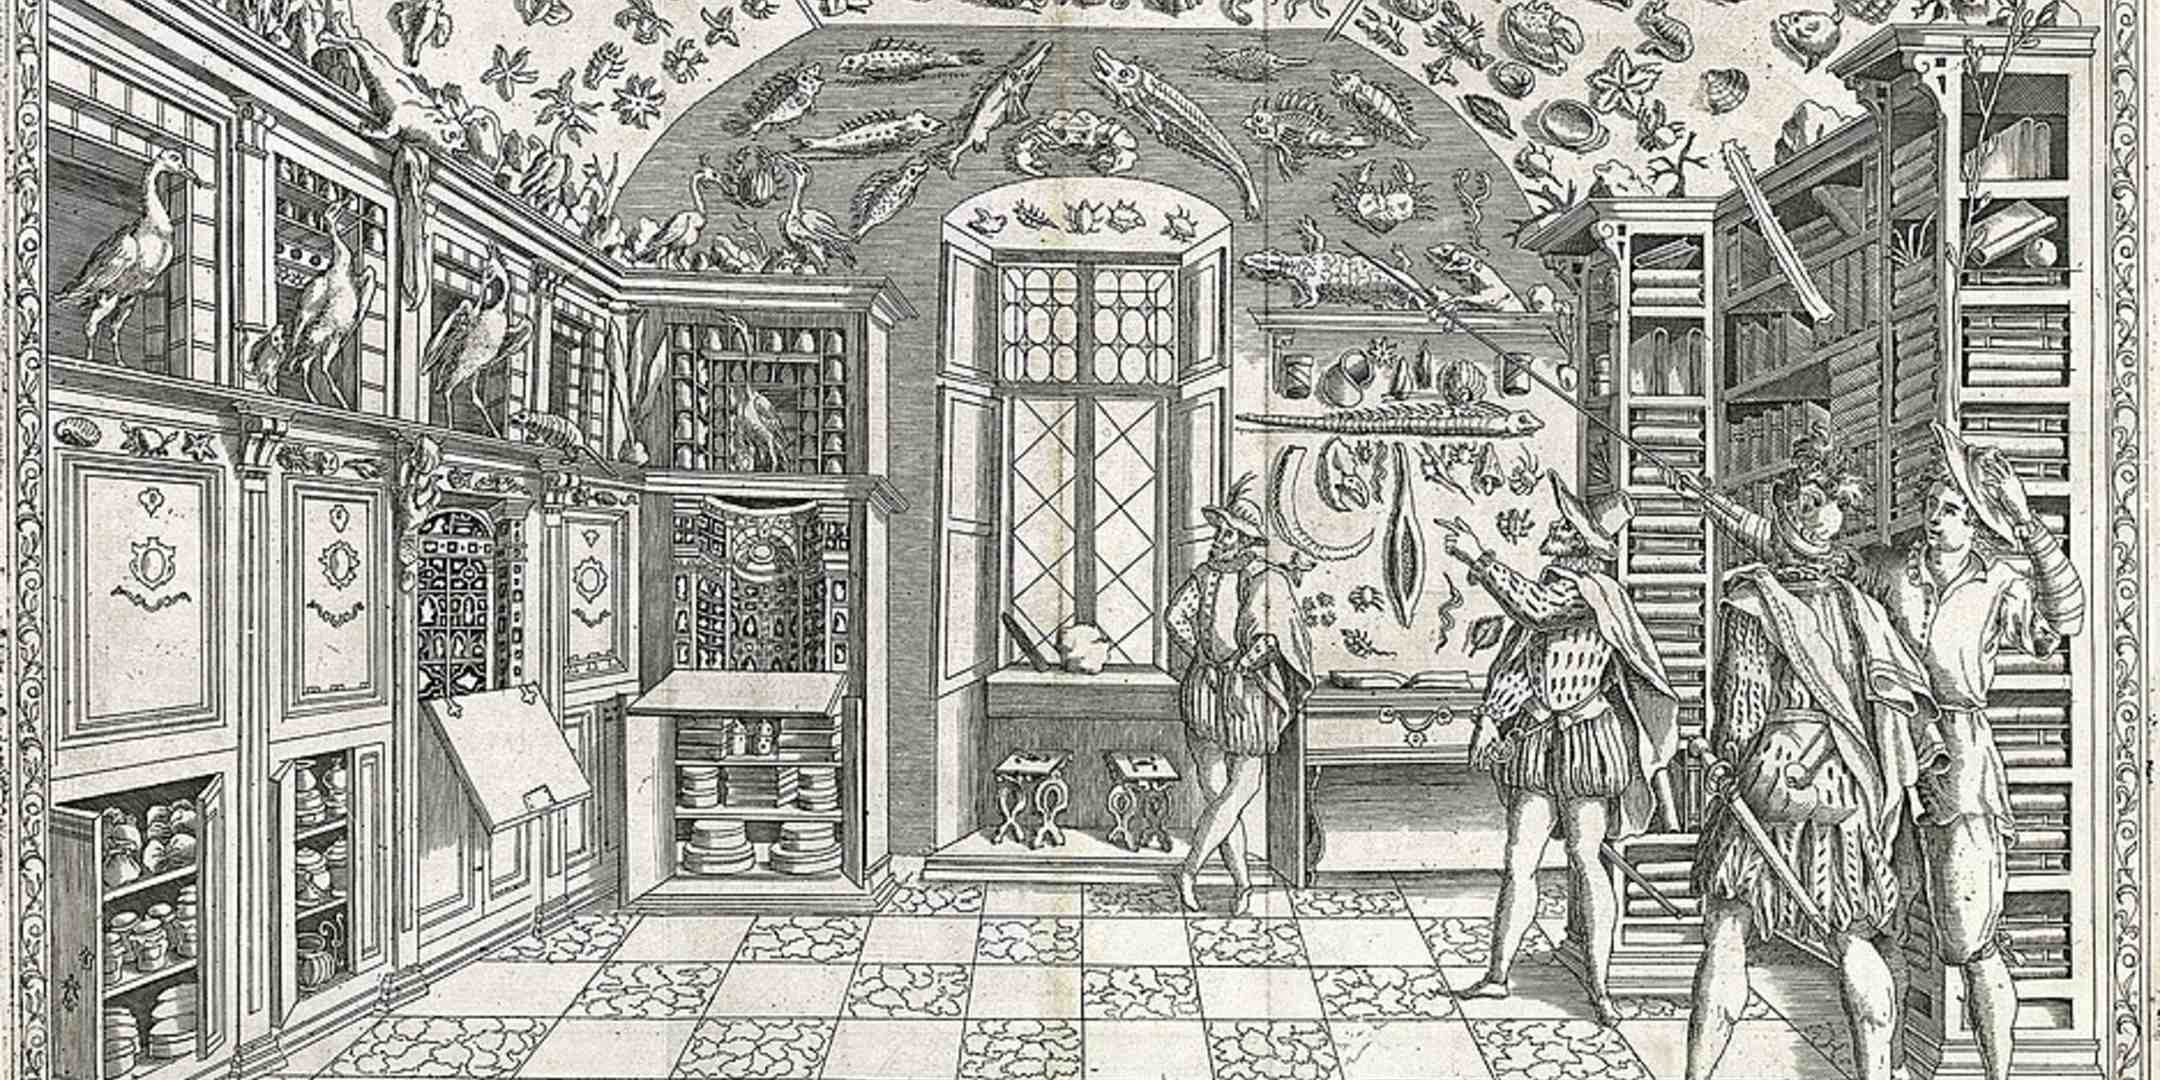 Fold-out engraving from Ferrante Imperato's Dell'Historia Naturale (Naples 1599), the earliest illustration of a natural history cabinet. Source: Wikimedia